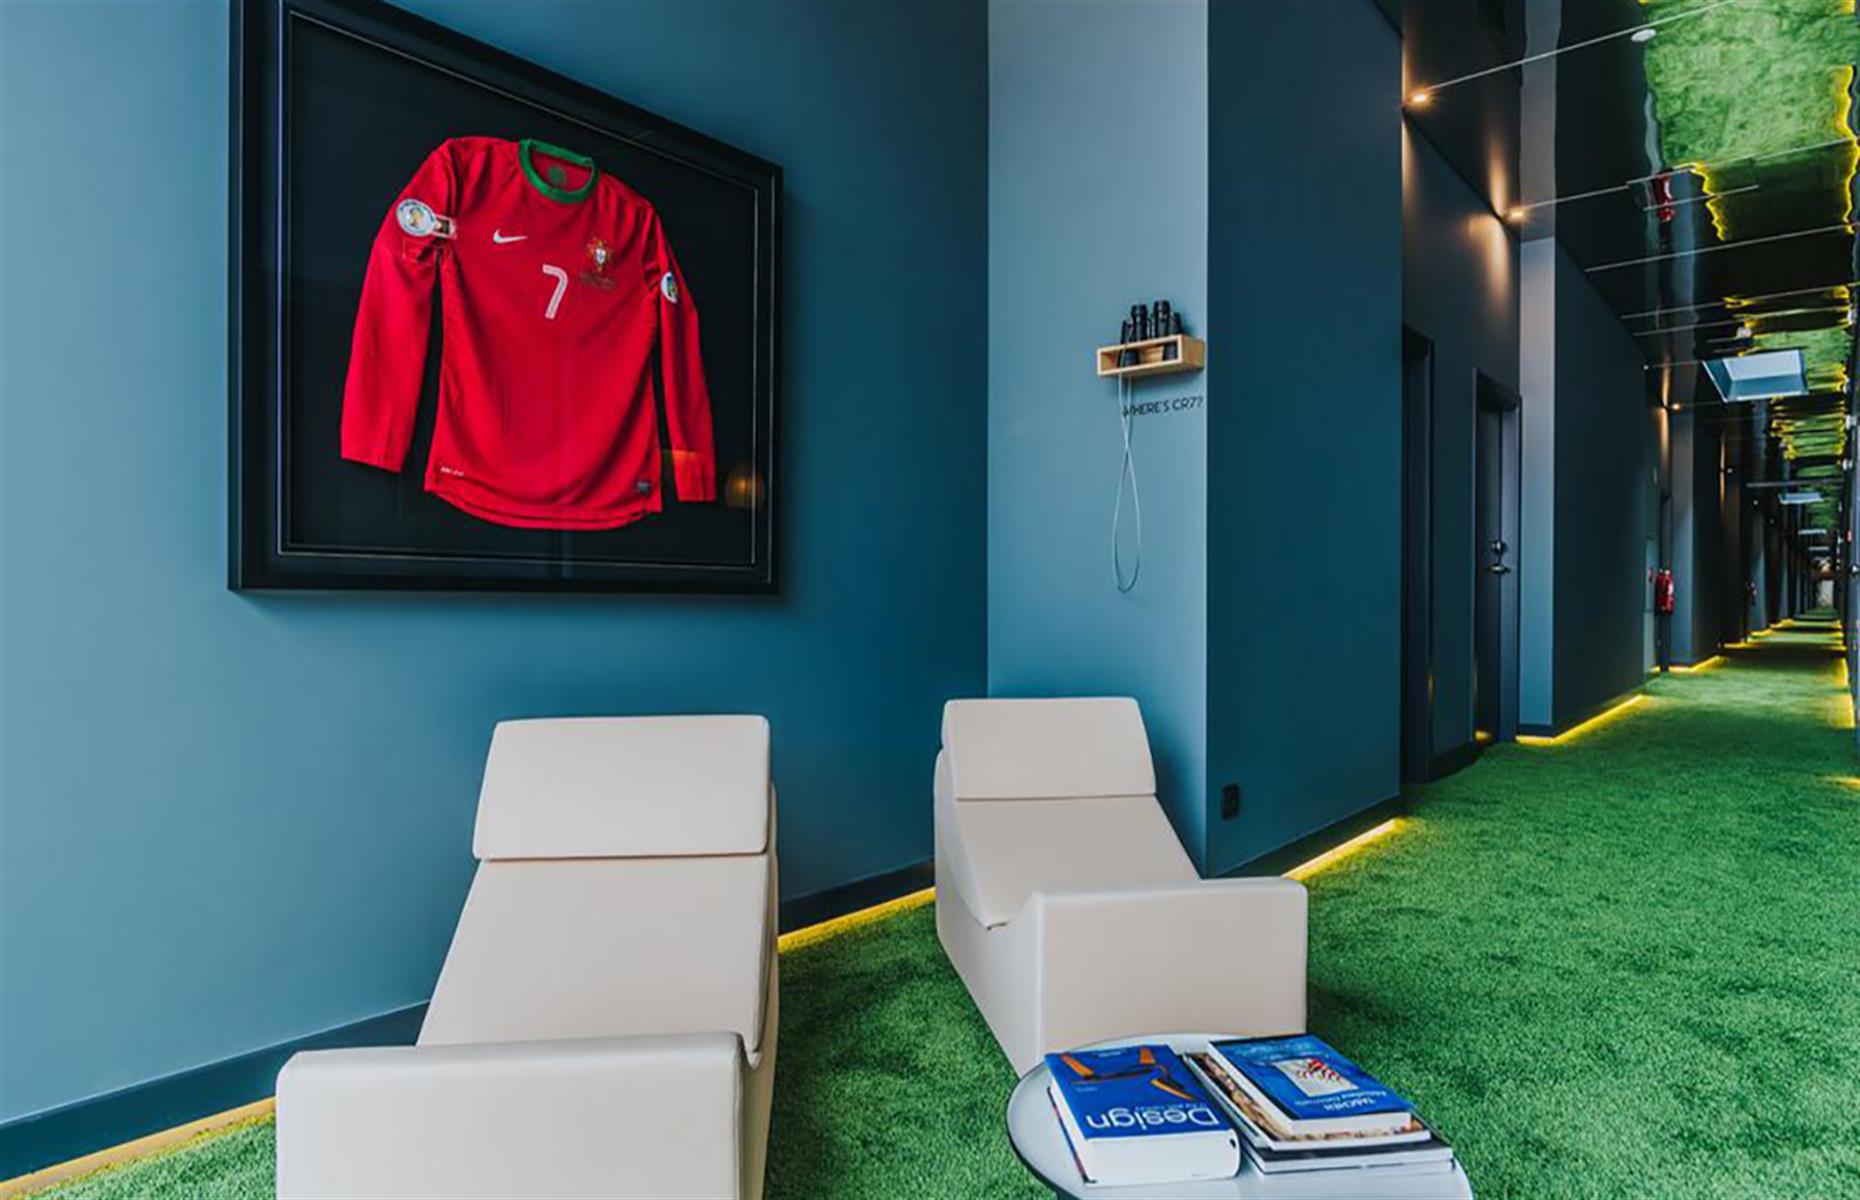 <p>Cristiano Ronaldo is often considered among the world's best soccer players but who knew he's also given the hotel industry a go? <a href="https://www.booking.com/hotel/pt/pestana-cr7-funchal.en-gb.html" rel="nofollow” target=">Pestana CR7</a> is a hotel entirely dedicated to Ronaldo in his hometown Funchal on the Portuguese island of Madeira. As you might have guessed this hotel is all about the soccer star so expect to see lots of his shirts, boots and pictures. Don't say we didn't warn you...</p>